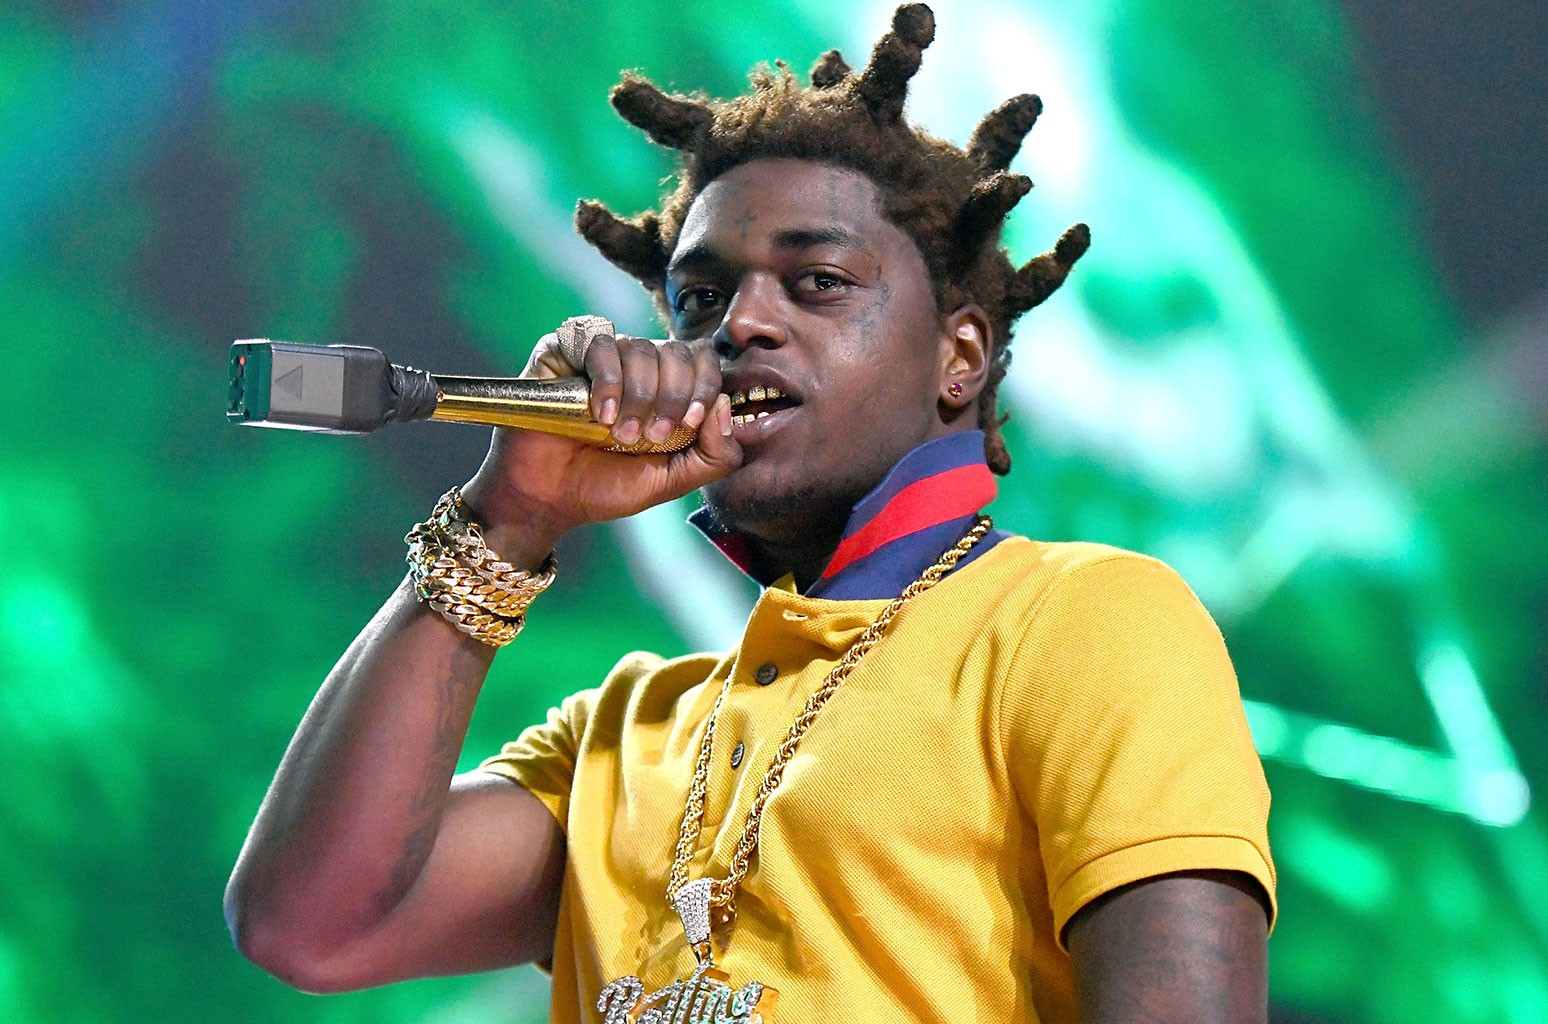 Kodak Black Responds to the Viral Video of Him Groping His Mother